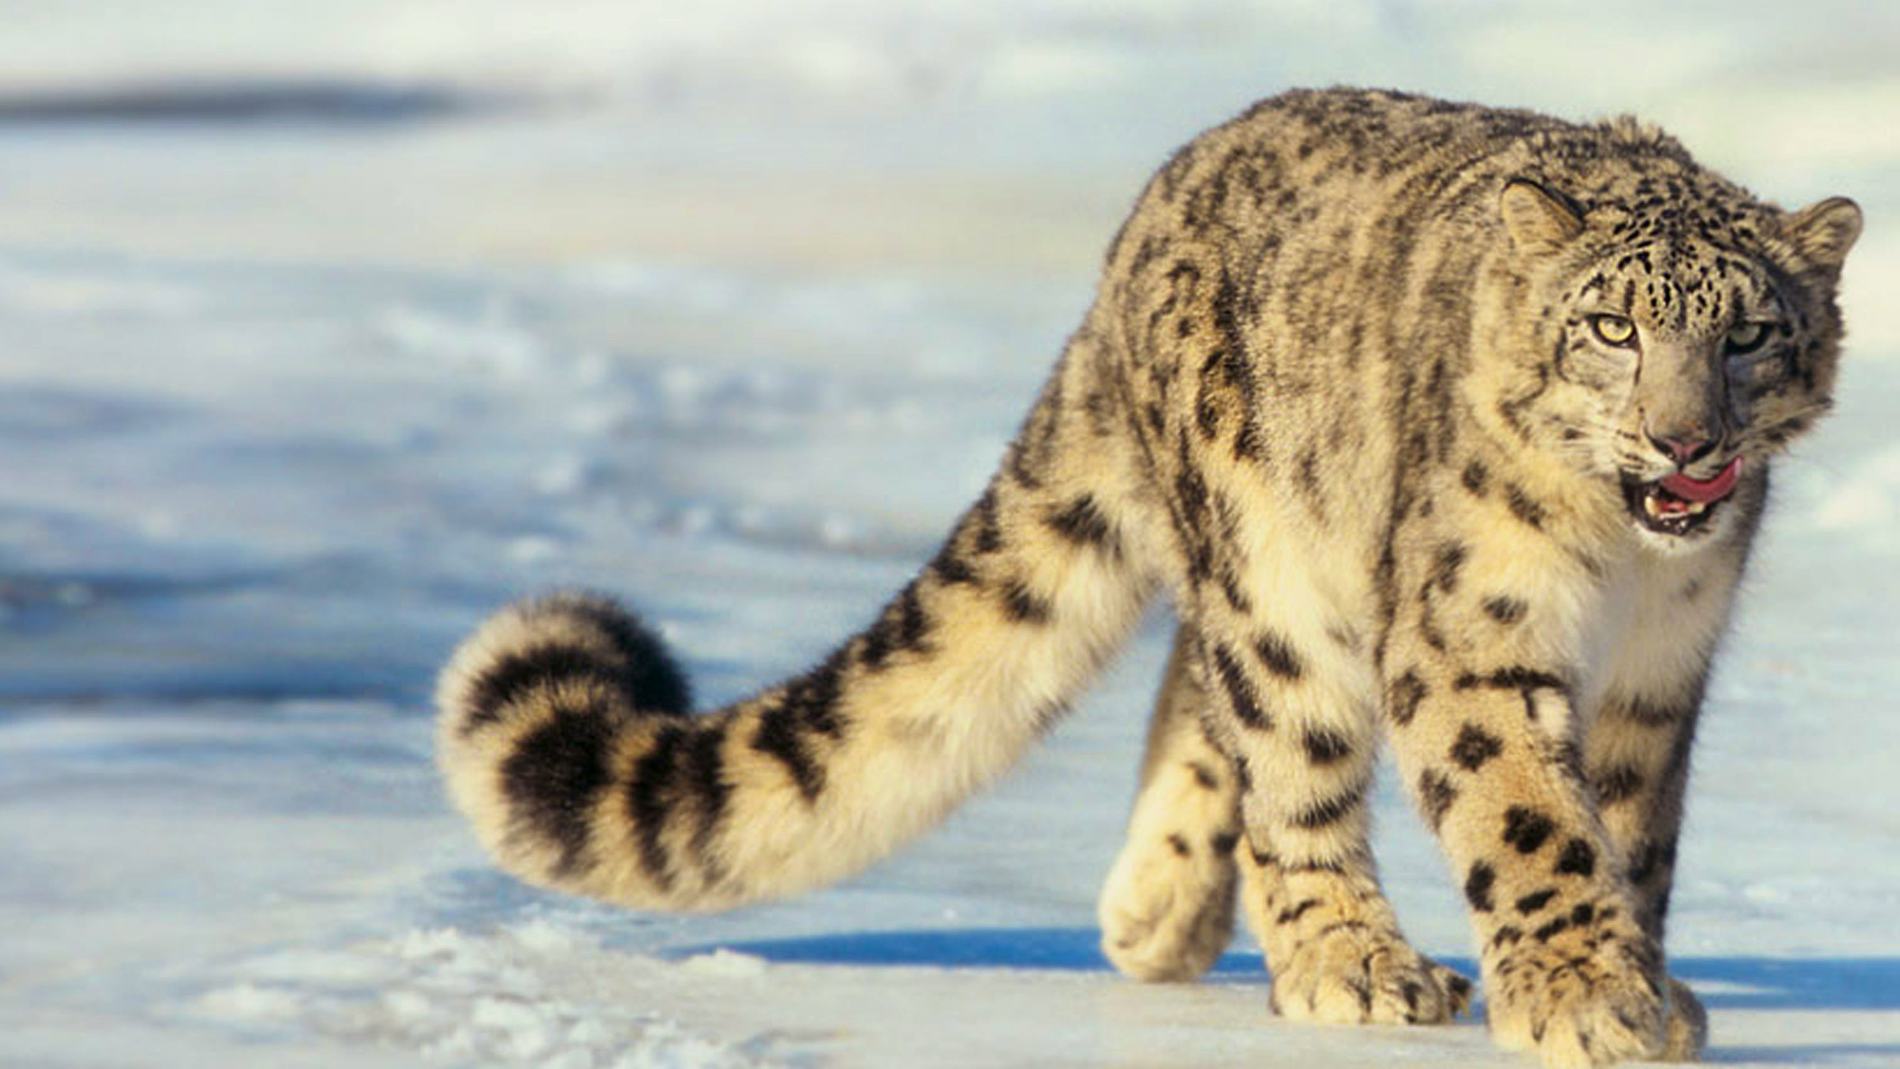 Newsela - Cameras in the wild help count the number of rare snow leopards  in Russia